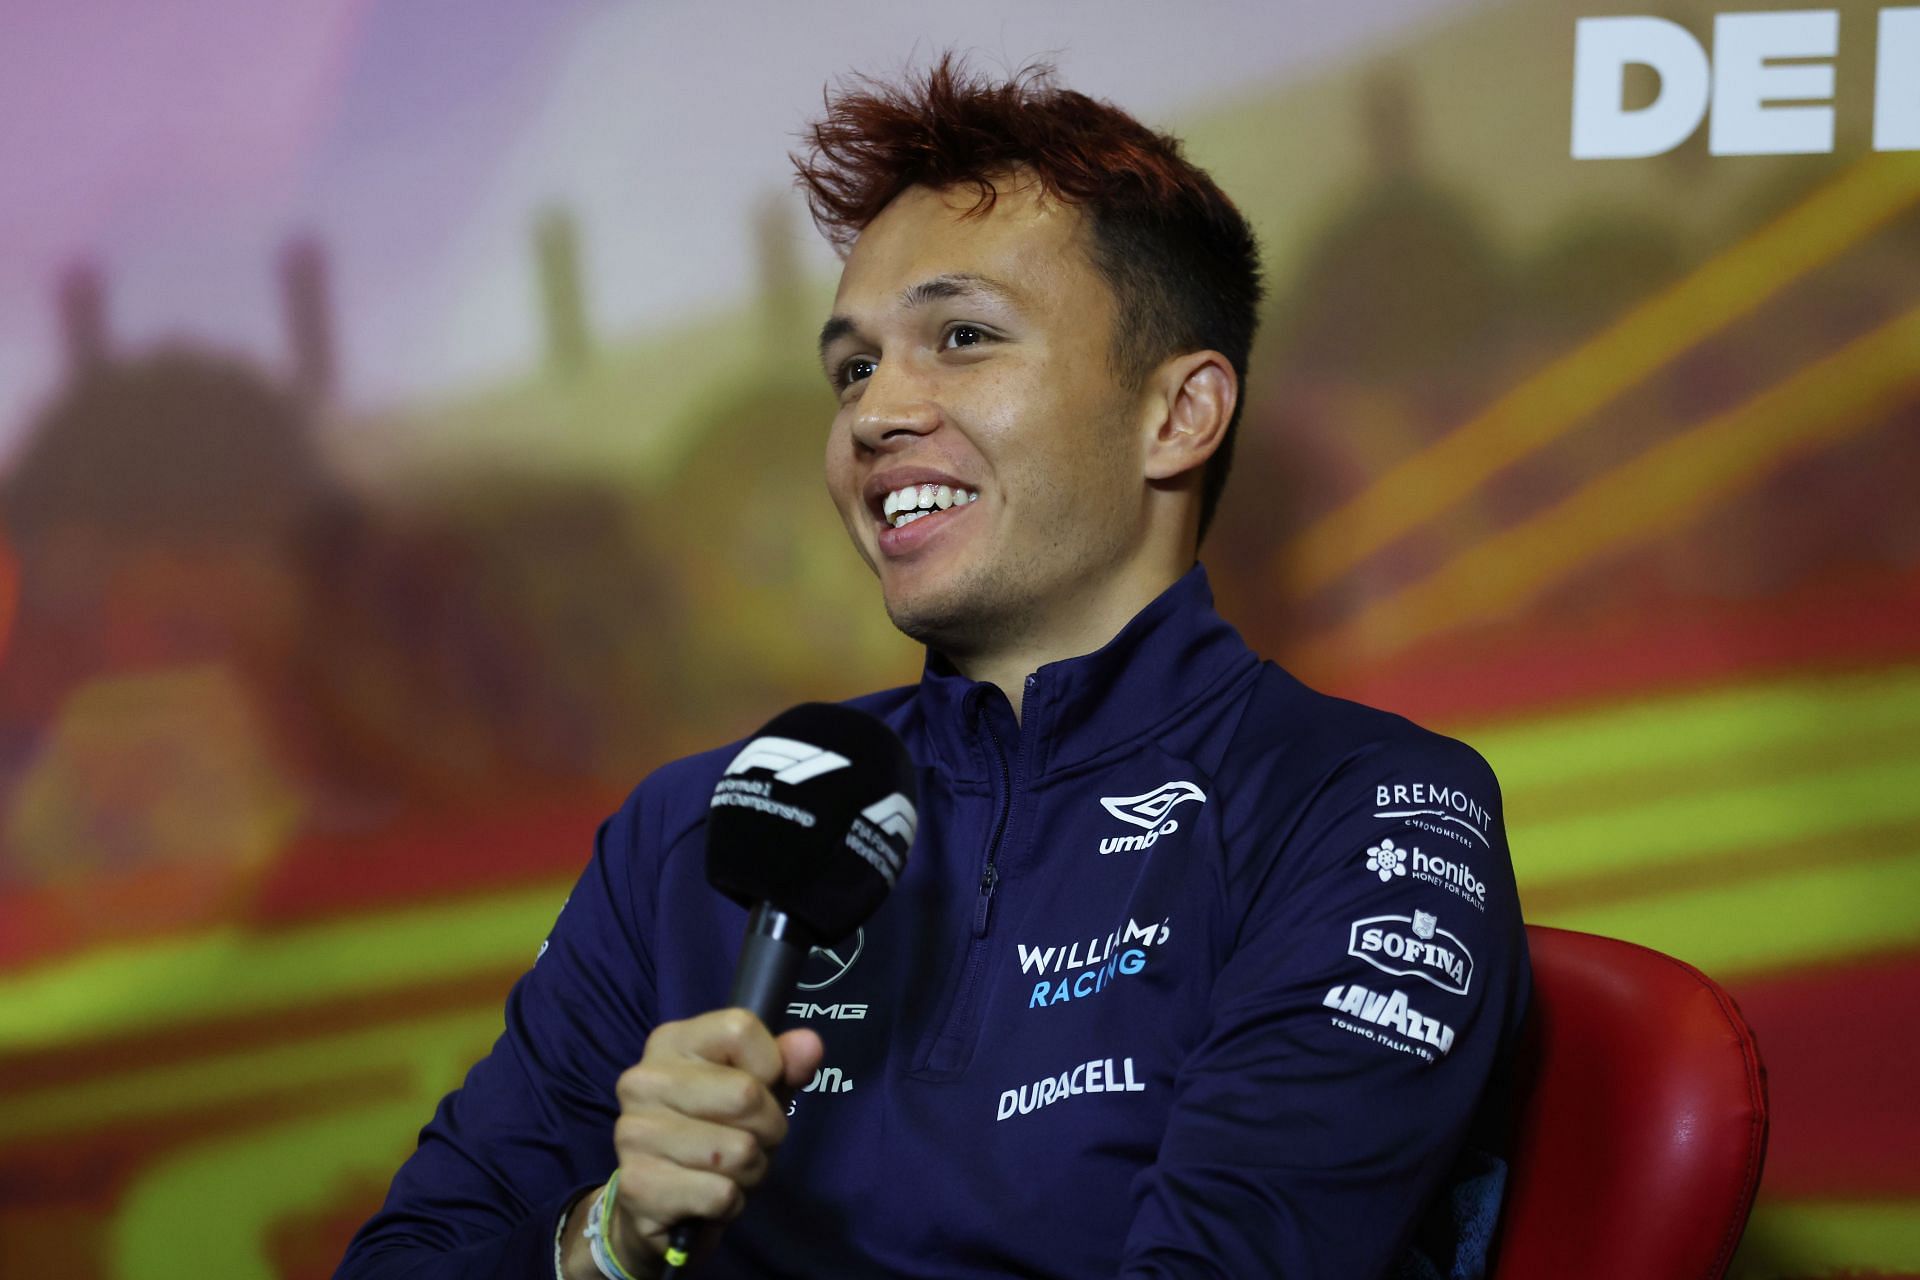 Alex Albon talks in the Drivers Press Conference prior to practice ahead of the F1 Grand Prix of Spain at Circuit de Barcelona-Catalunya on May 20, 2022 in Barcelona, Spain. (Photo by Bryn Lennon/Getty Images)